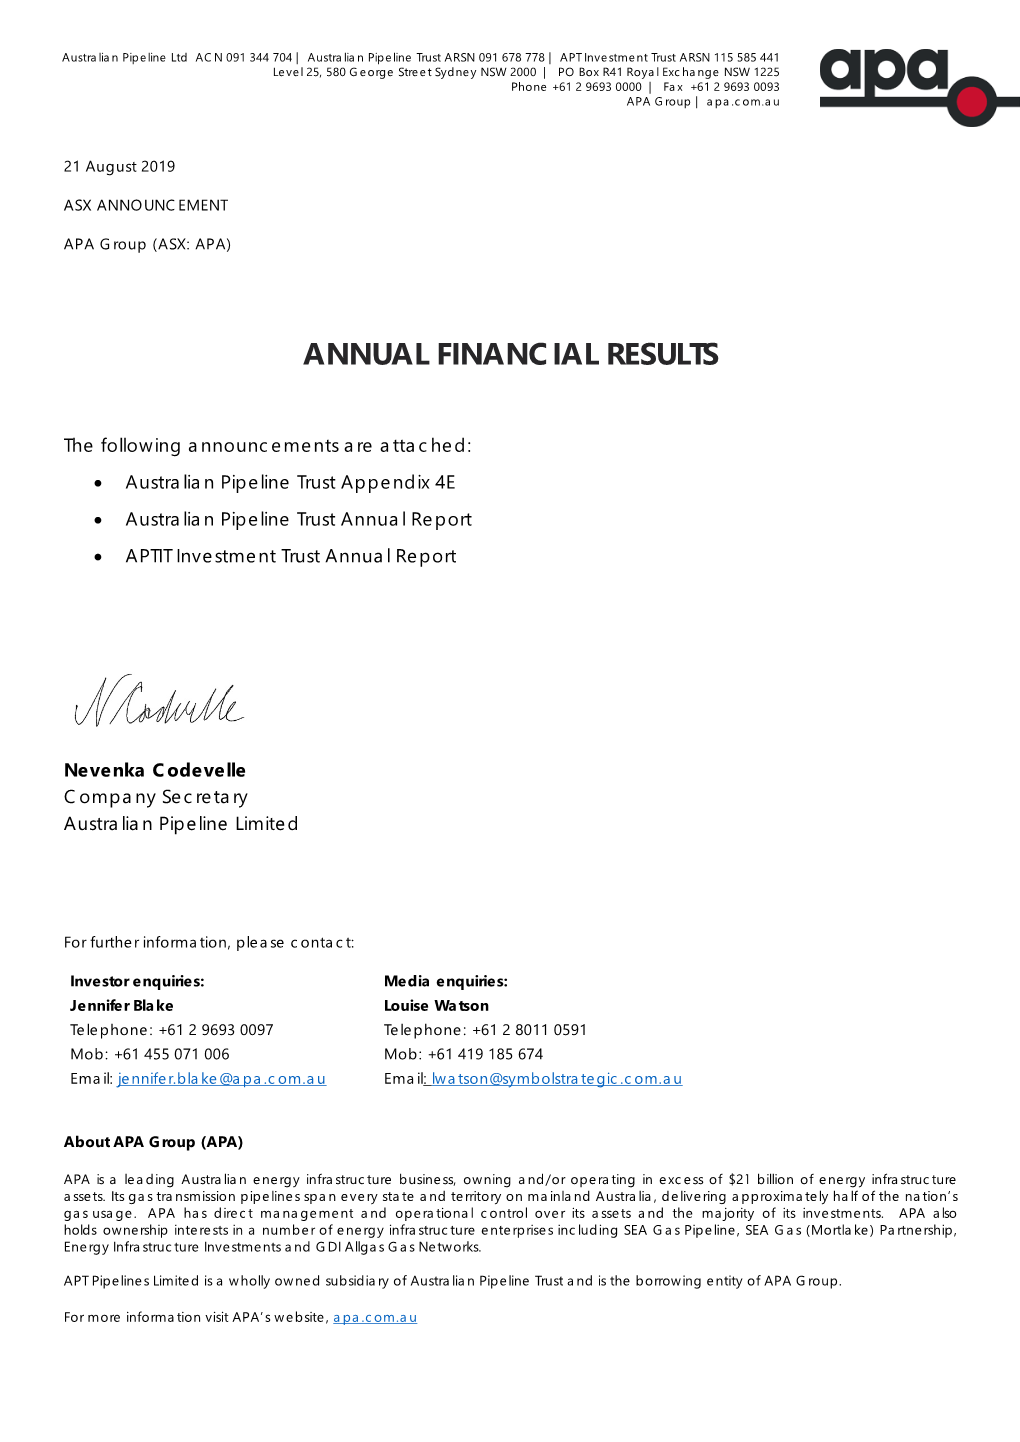 Annual Financial Results